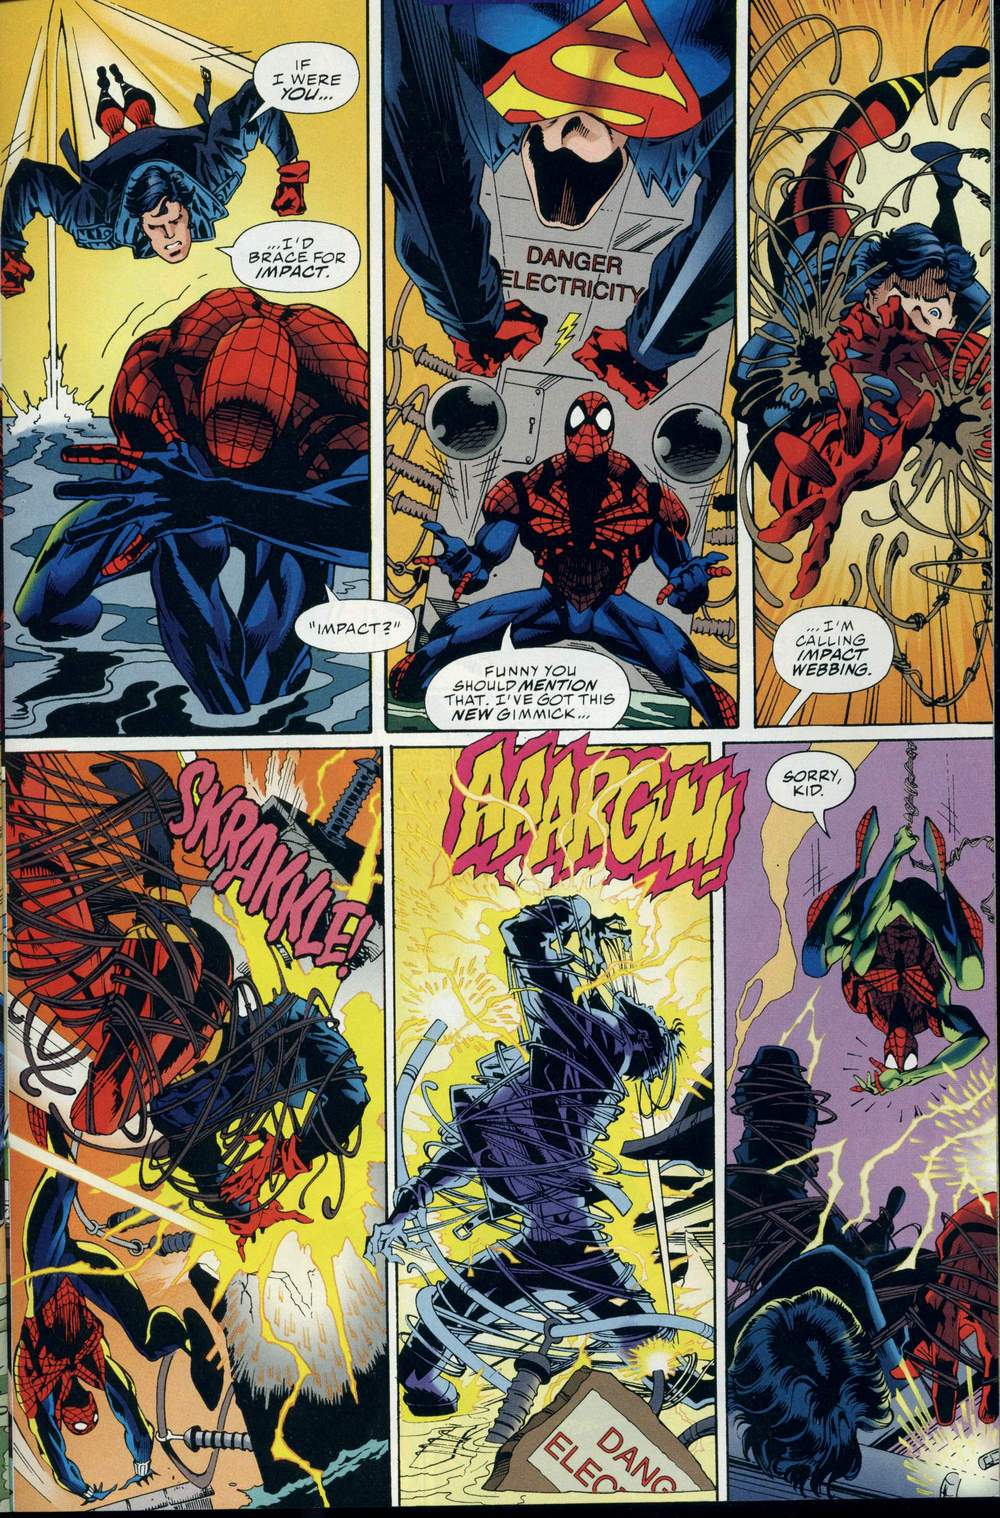 Ben Reilly proves experience wins out over brute force in Marvel Versus DC Vol. 1 #3 "Round Three" (1996), Marvel Comics/DC. Words by Ron Marz, art by Dan Jurgens, Claudio Casteliini, Joe Rubinstein, Paul Neary, Gregory Wright, and Bill Oakley.